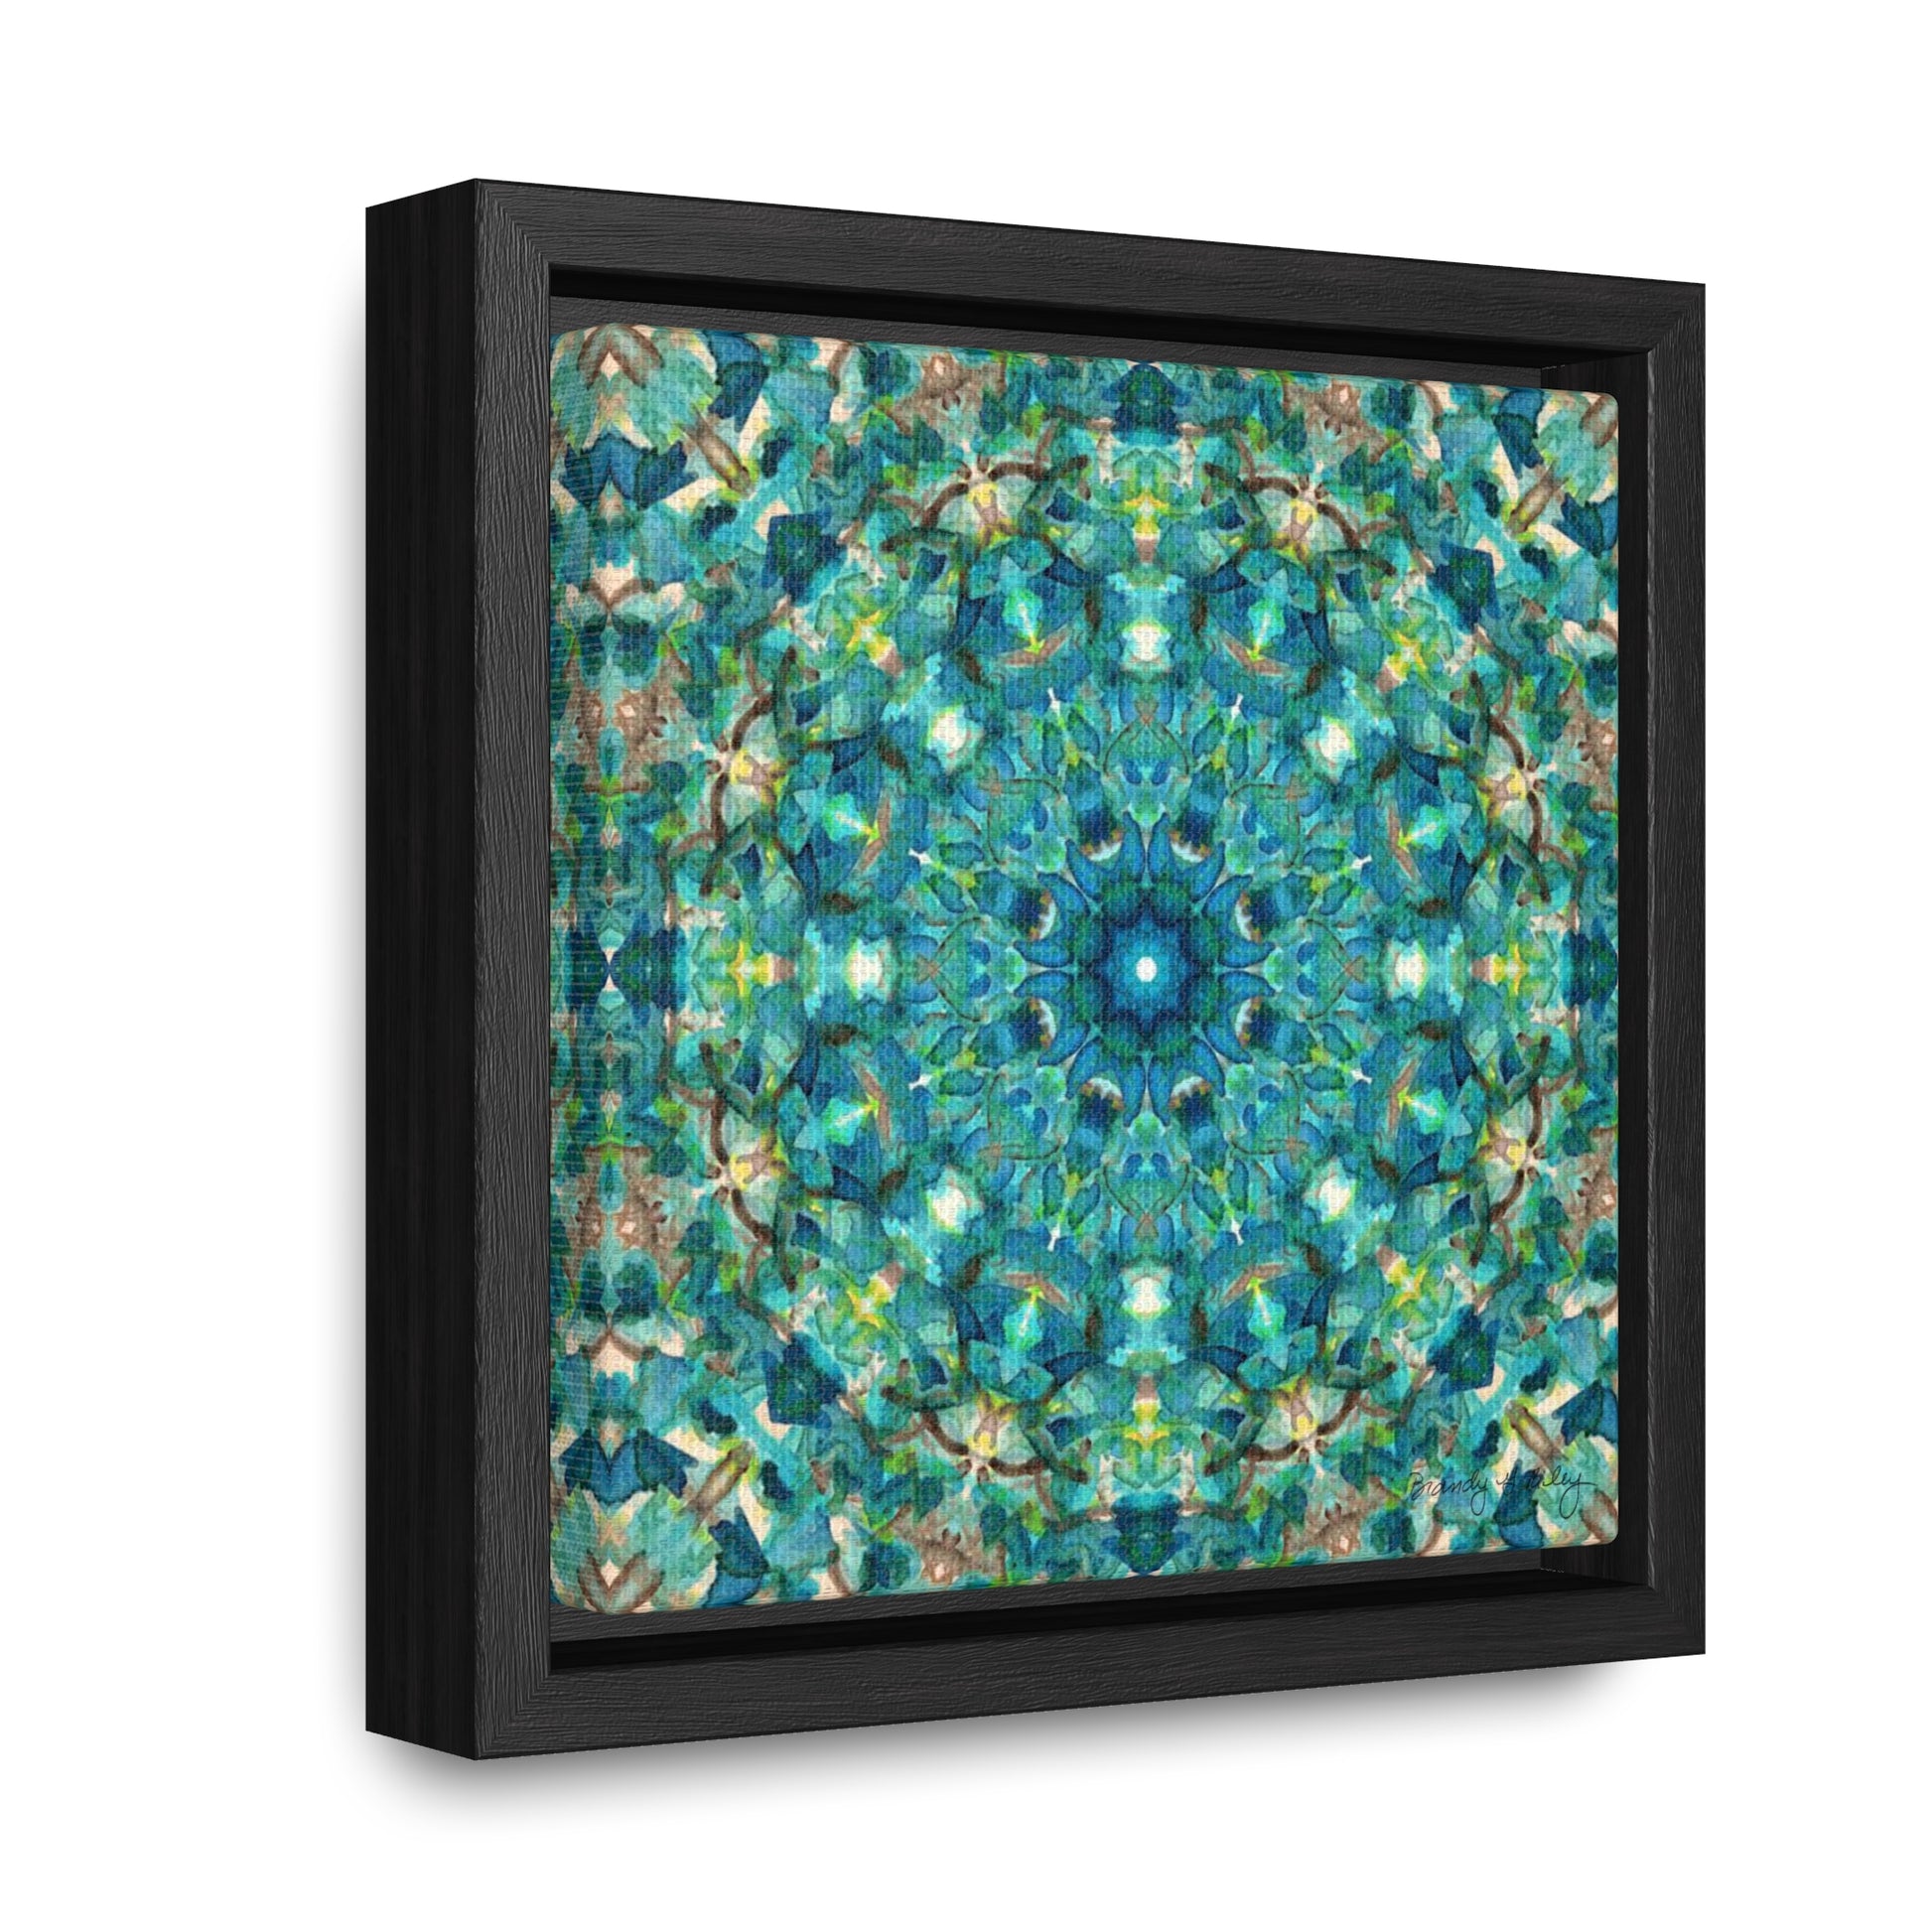 Stretched canvas featuring a teal abstract pattern in a black float frame